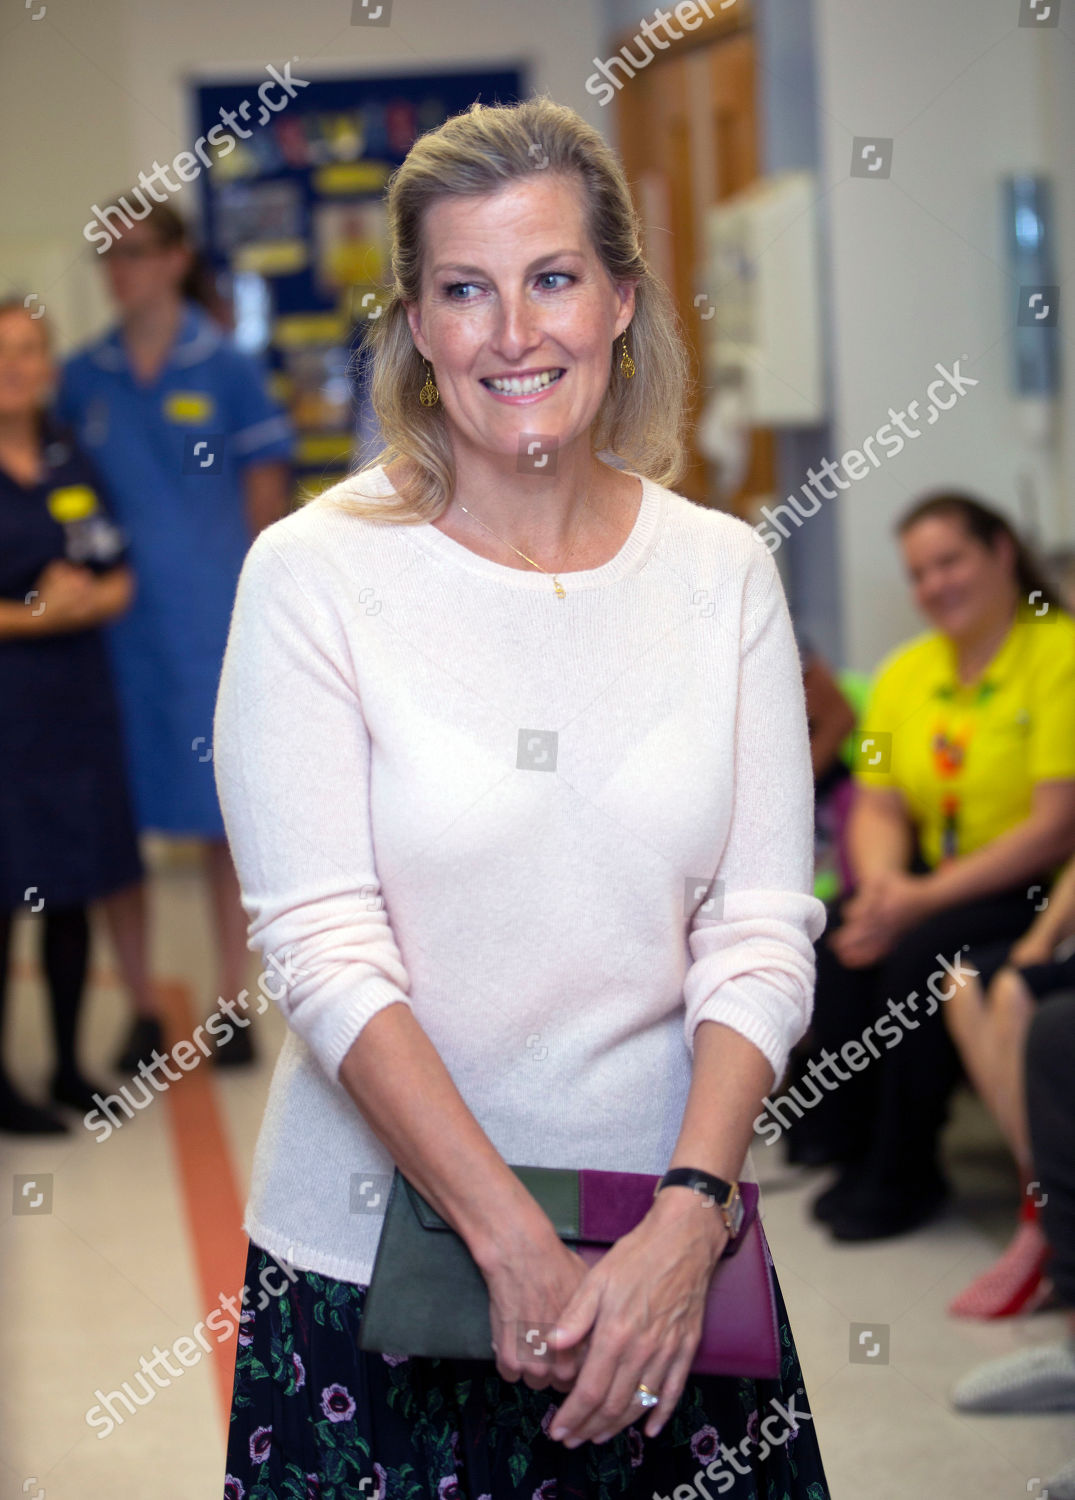 sophie-countess-of-wessex-visit-to-musgrove-park-hospital-taunton-somerset-uk-shutterstock-editorial-10422506z.jpg